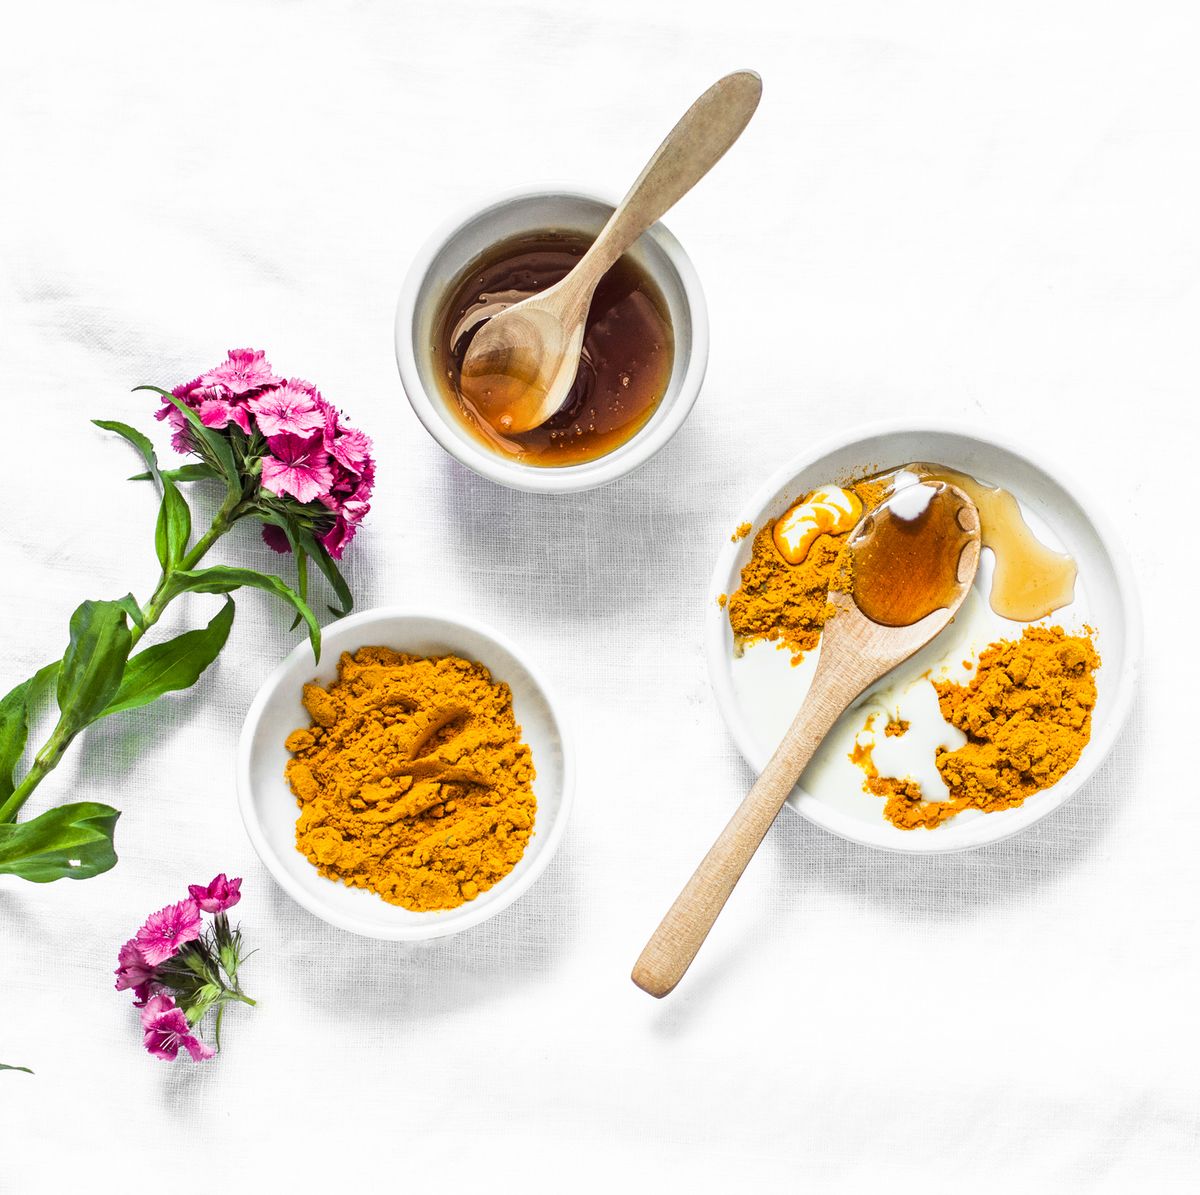 Turmeric for Skin: 5 Major Benefits & How to Use It